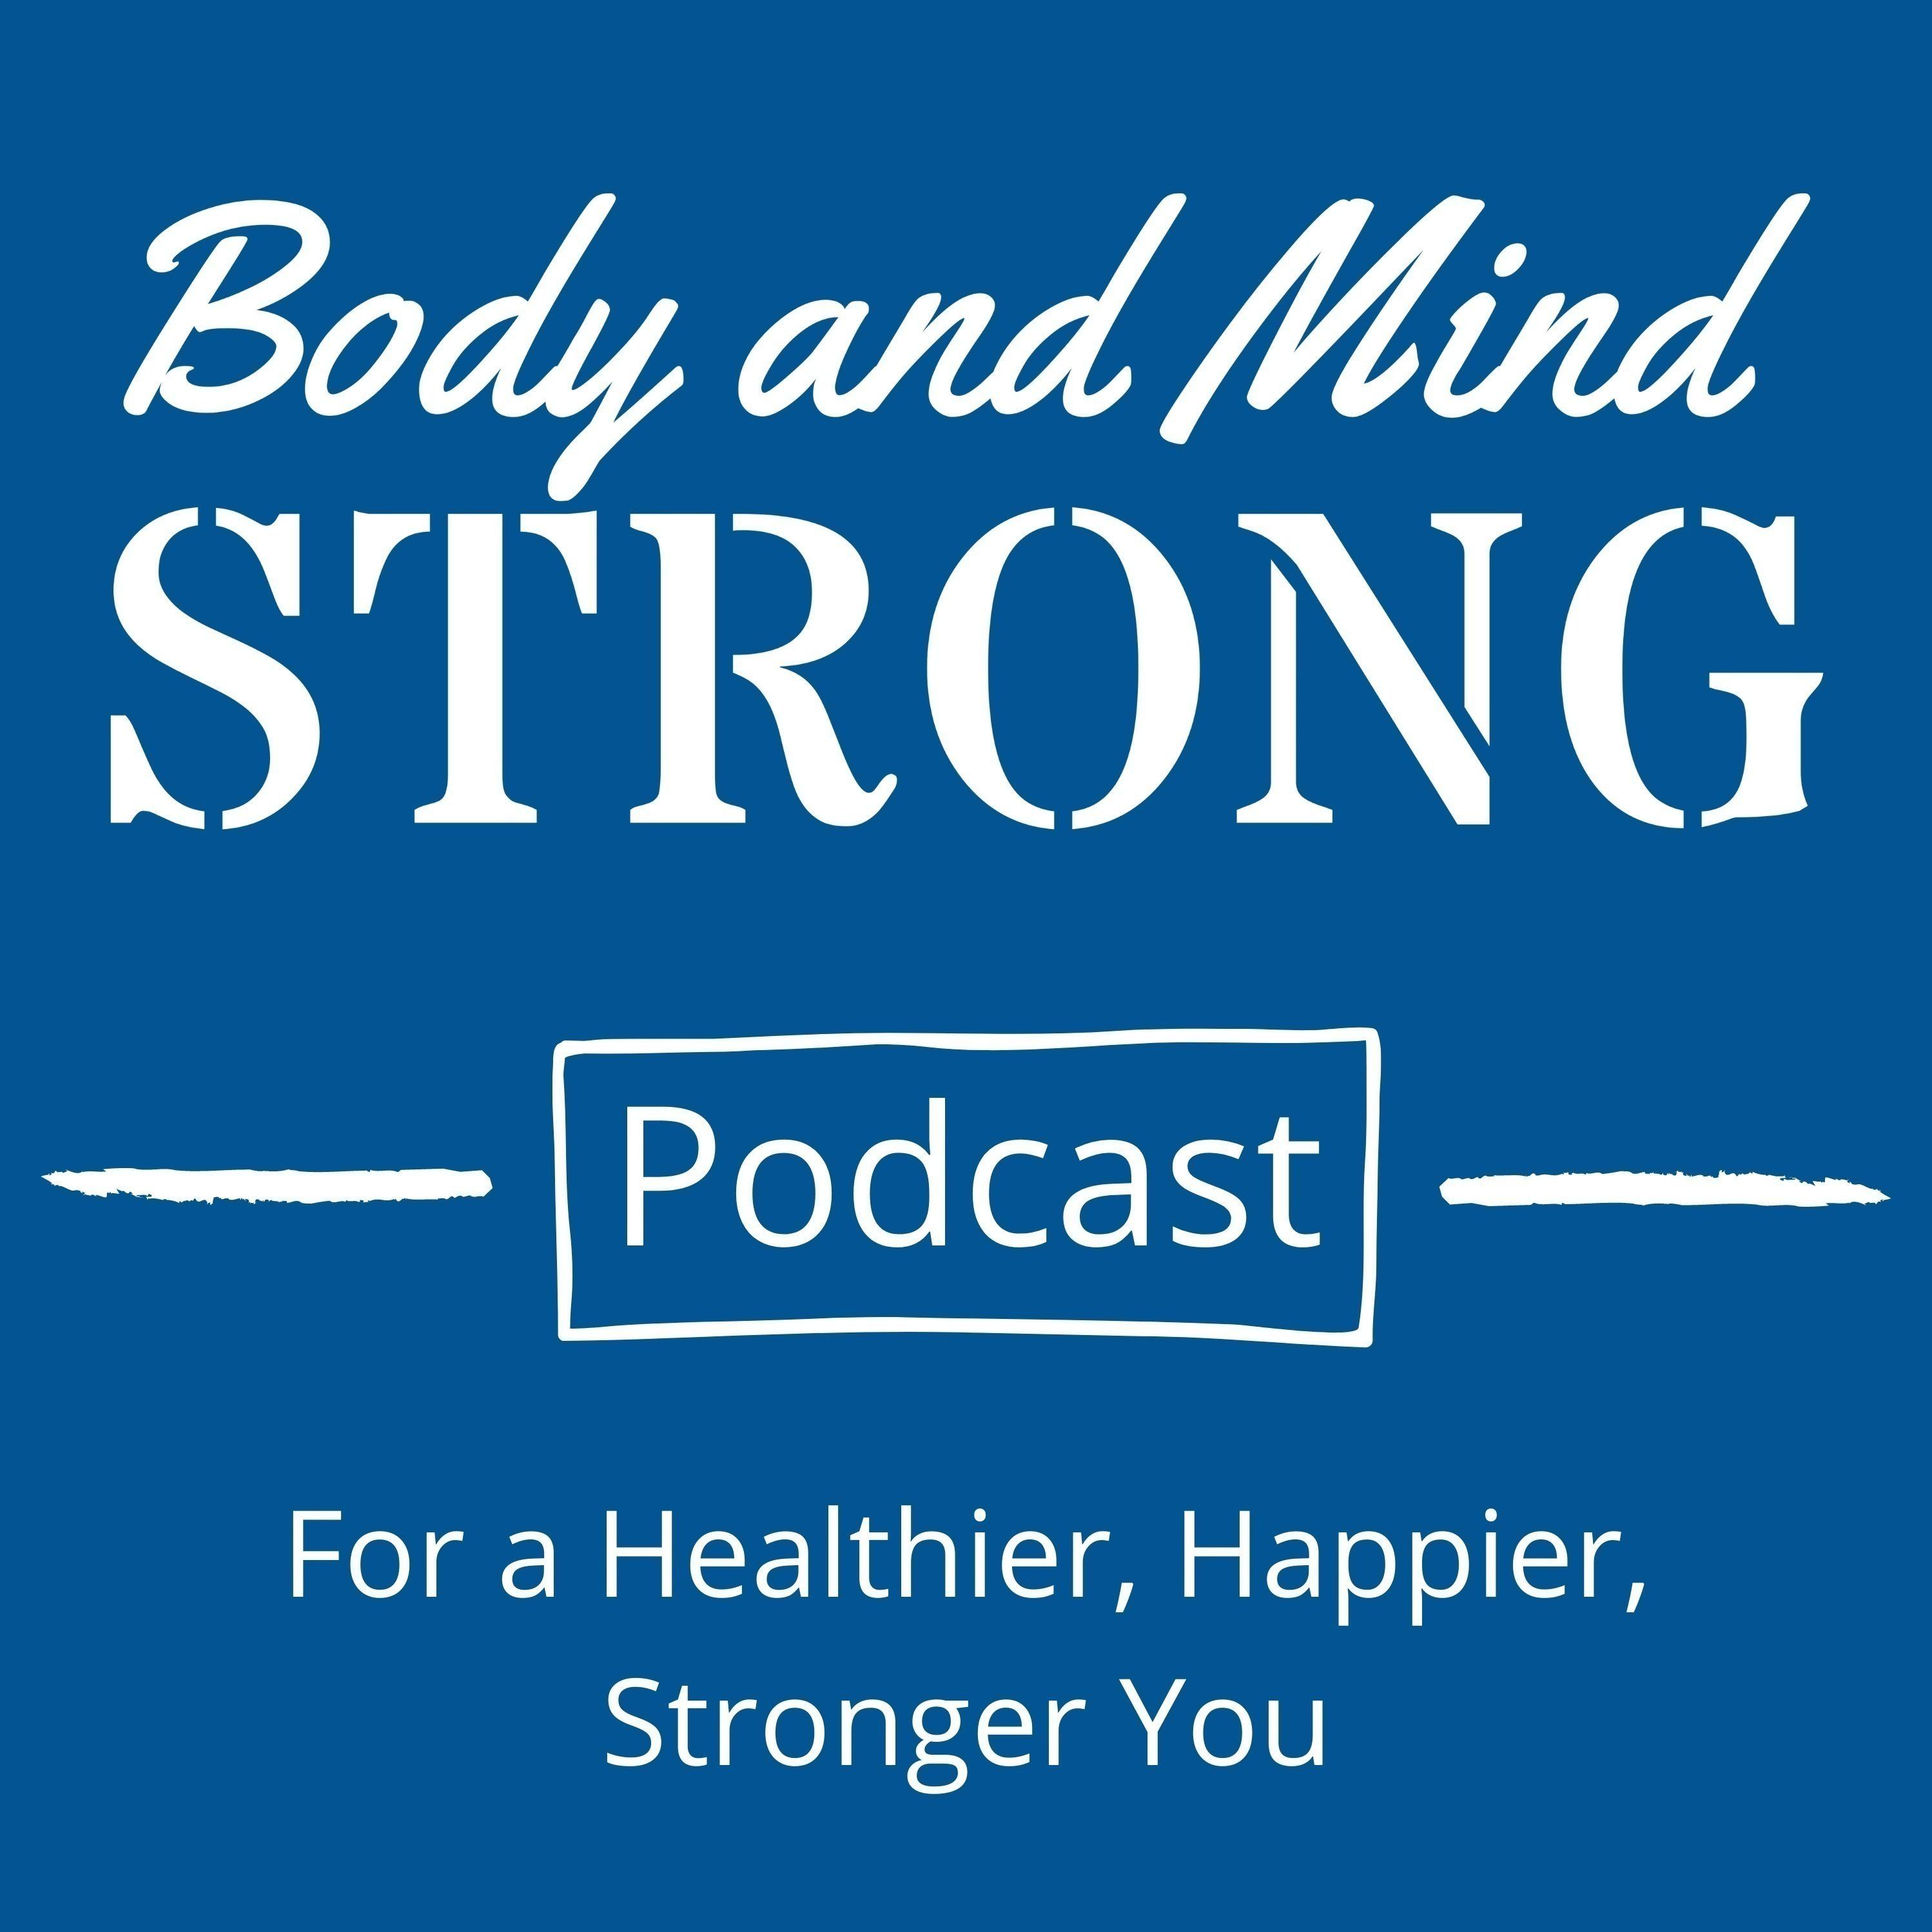 Body and Mind Strong Podcast